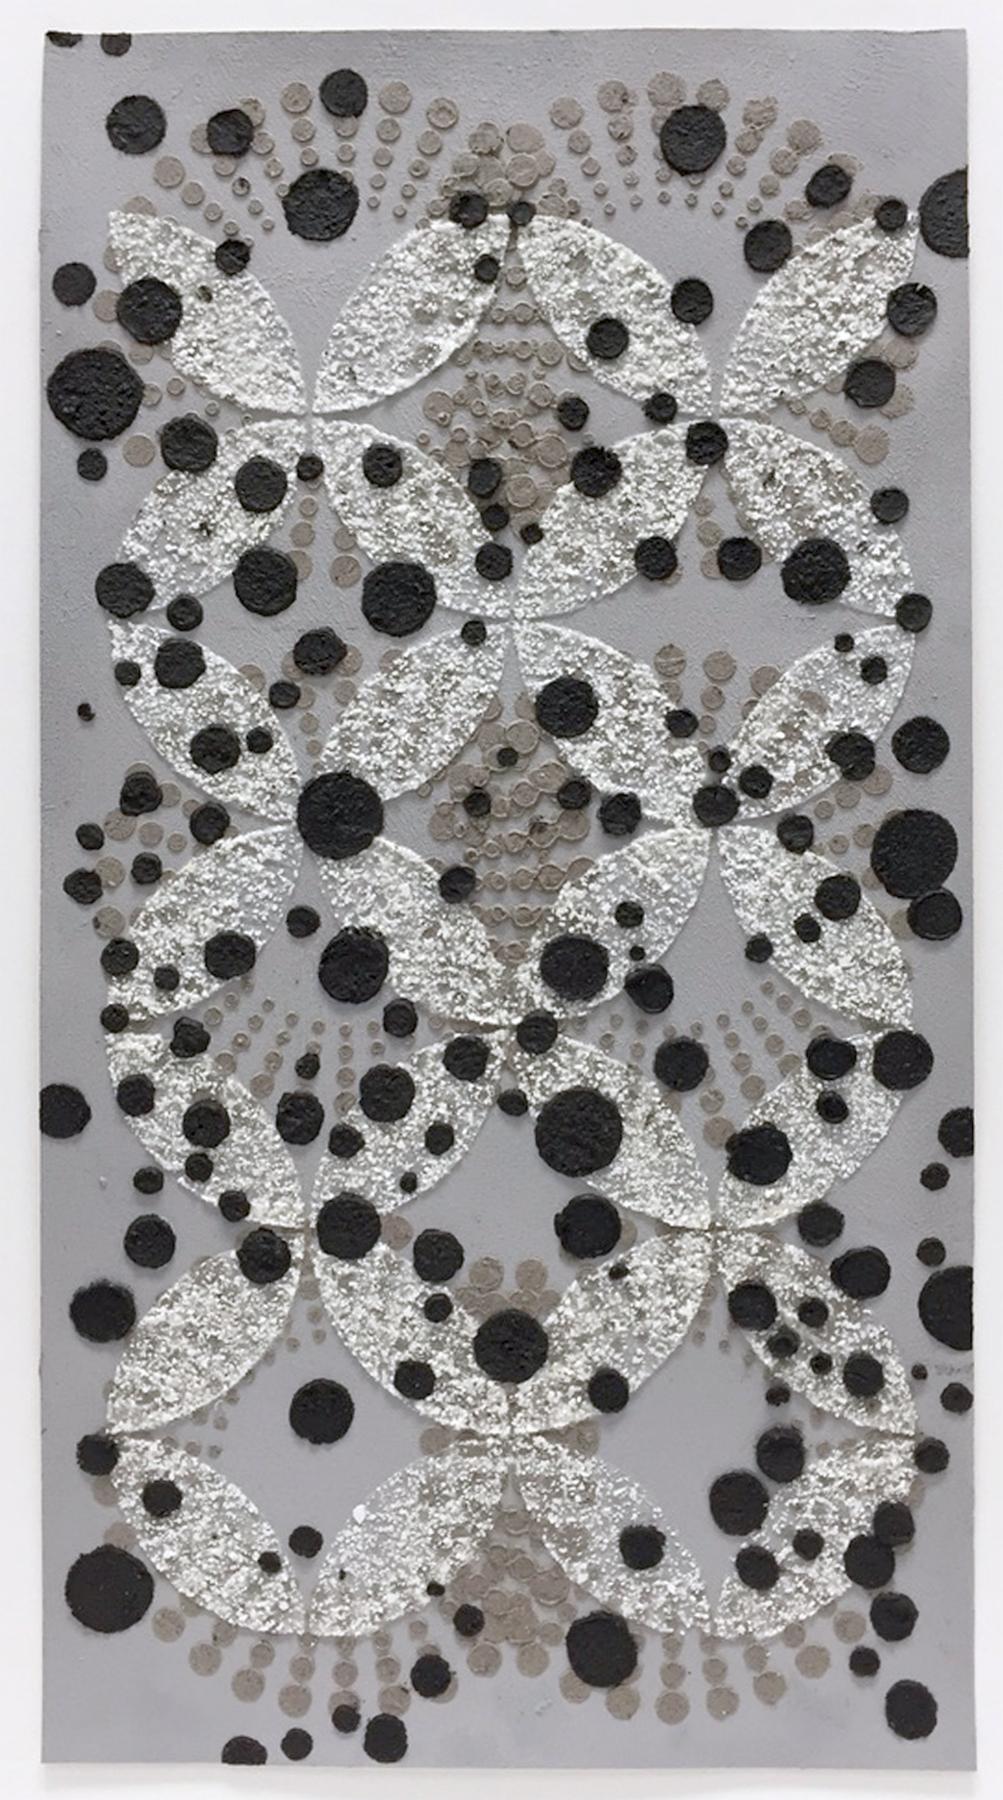 Untitled Black Dots on Two Patterns, Mixed Media, Eggshell, Ash Black on Gray